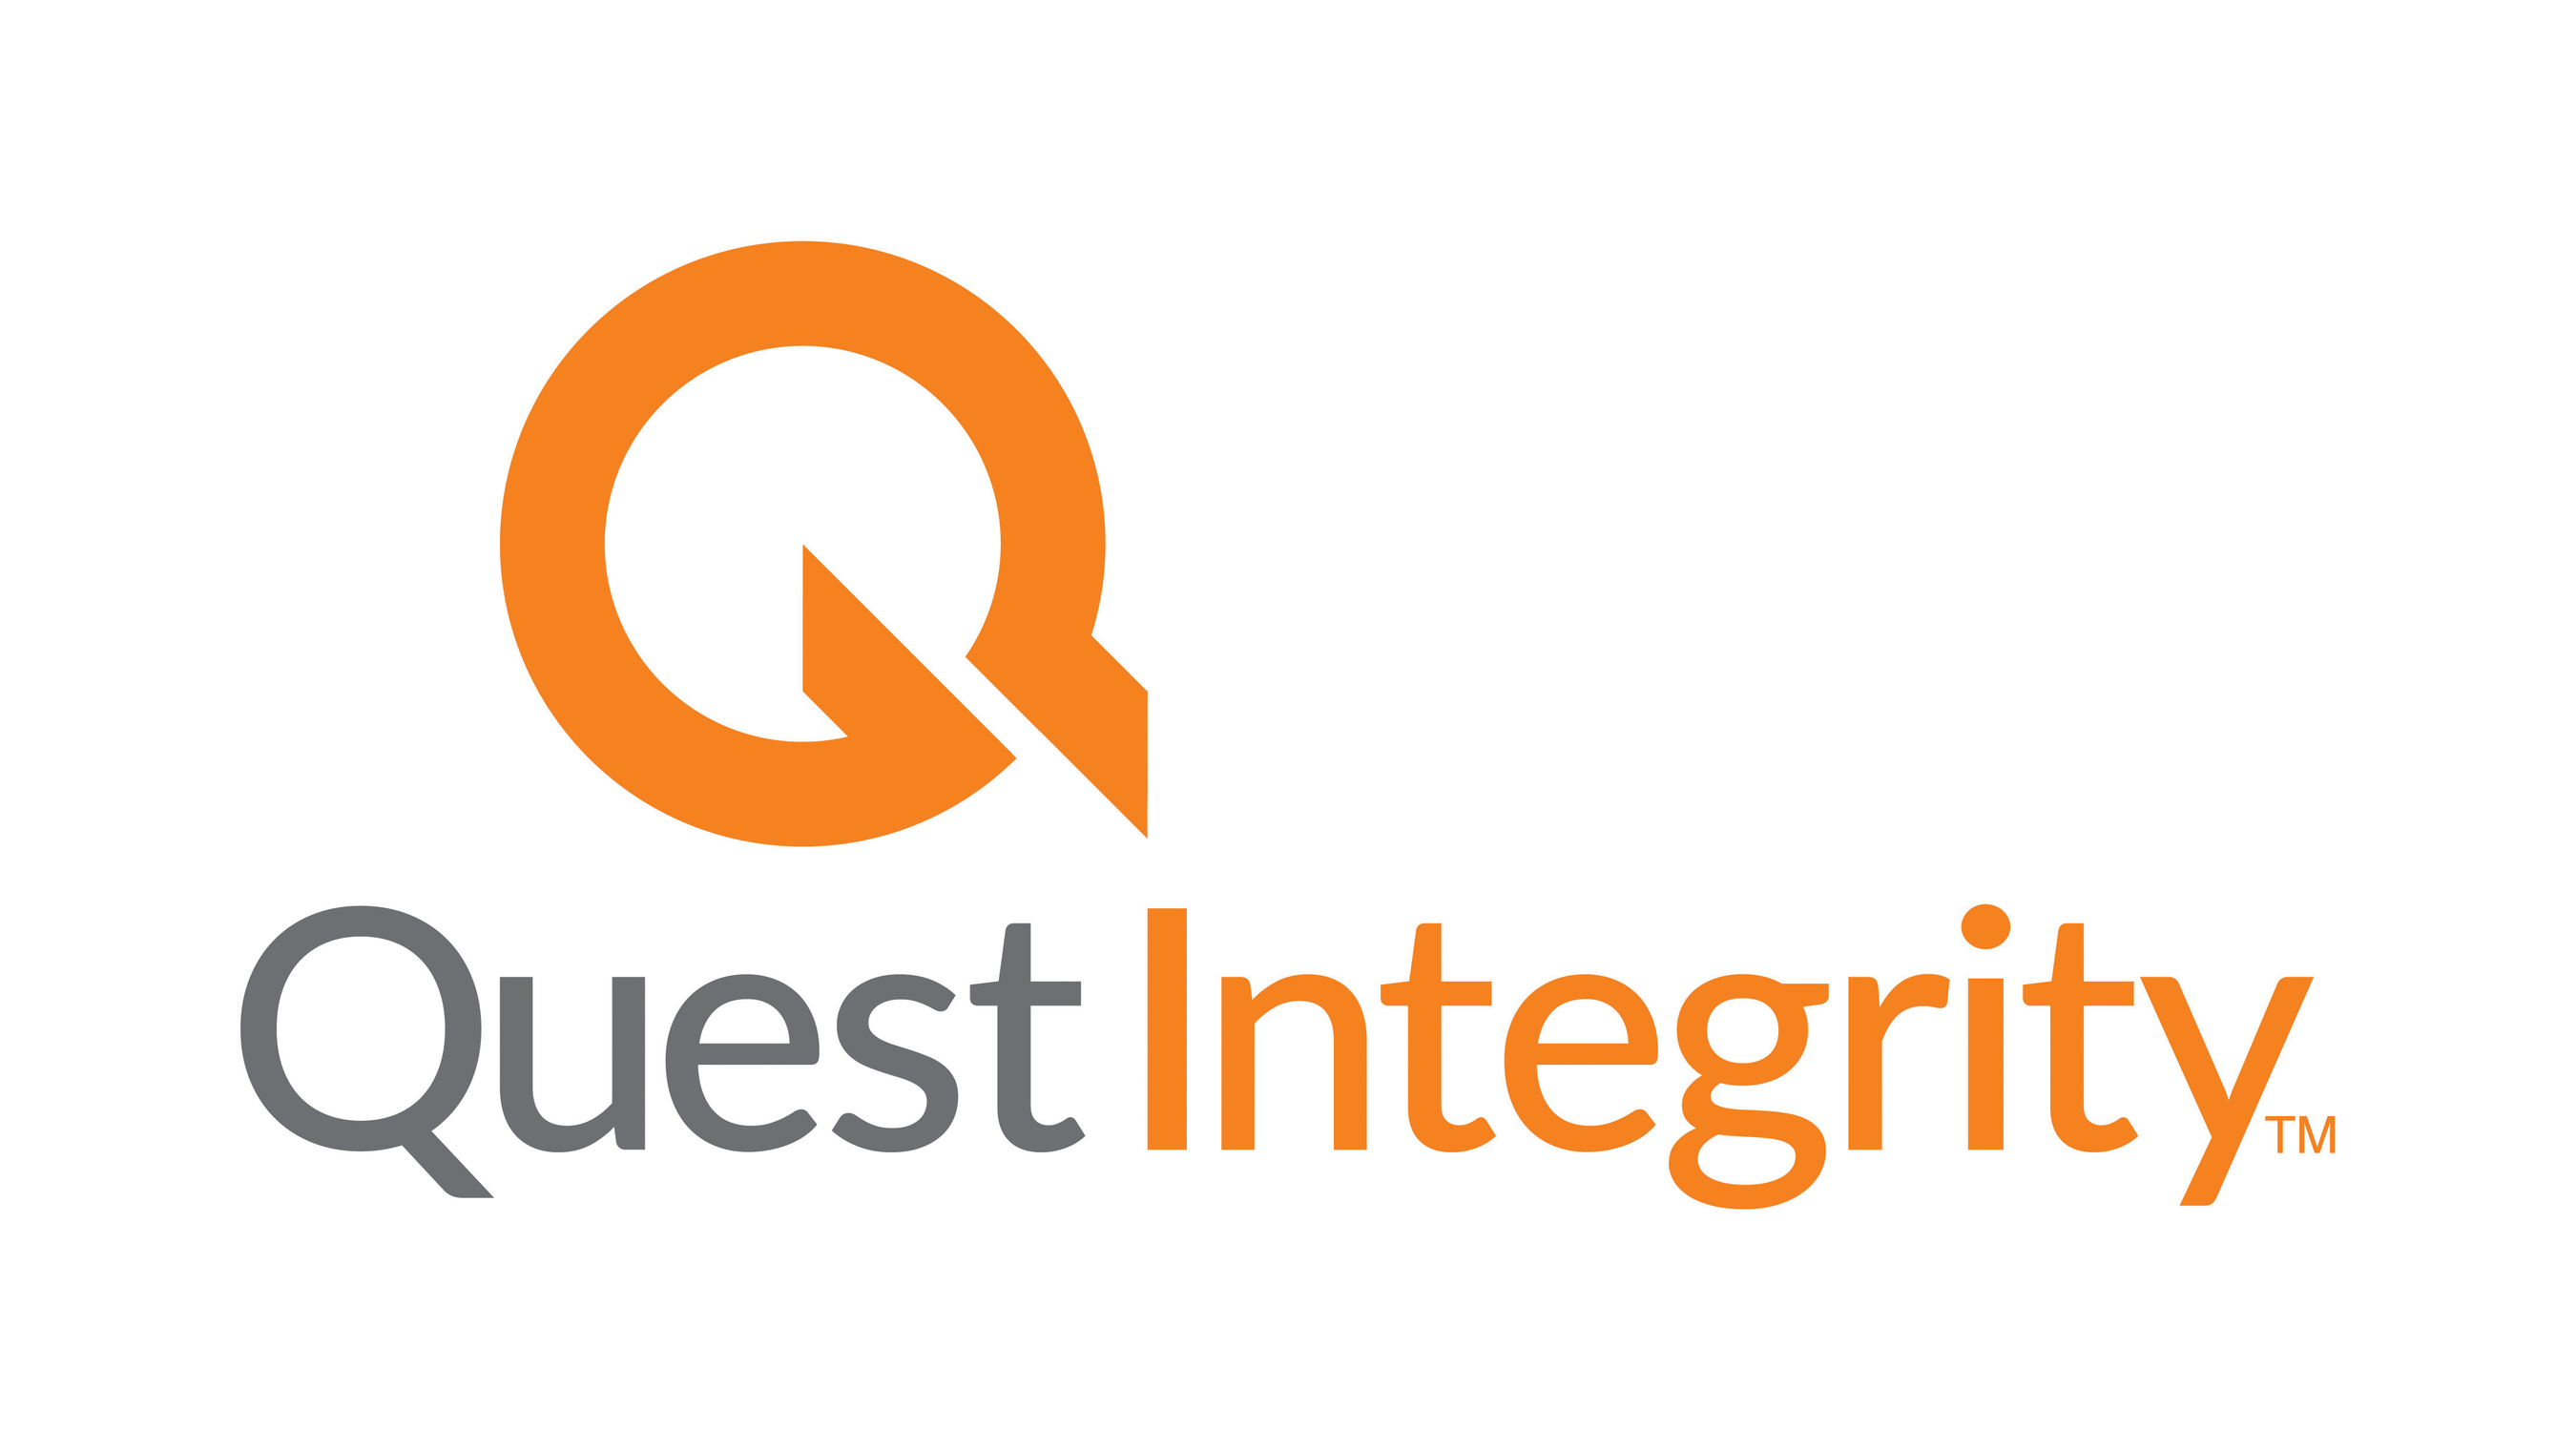 Quest Integrity is a global leader in the development and delivery of asset integrity and reliability management services that help organizations in the pipeline, refining, chemical, syngas and power industries improve operational planning, increase profitability, and reduce operational and safety risks. (PRNewsFoto/Quest Integrity Group) (PRNewsFoto/QUEST INTEGRITY GROUP)